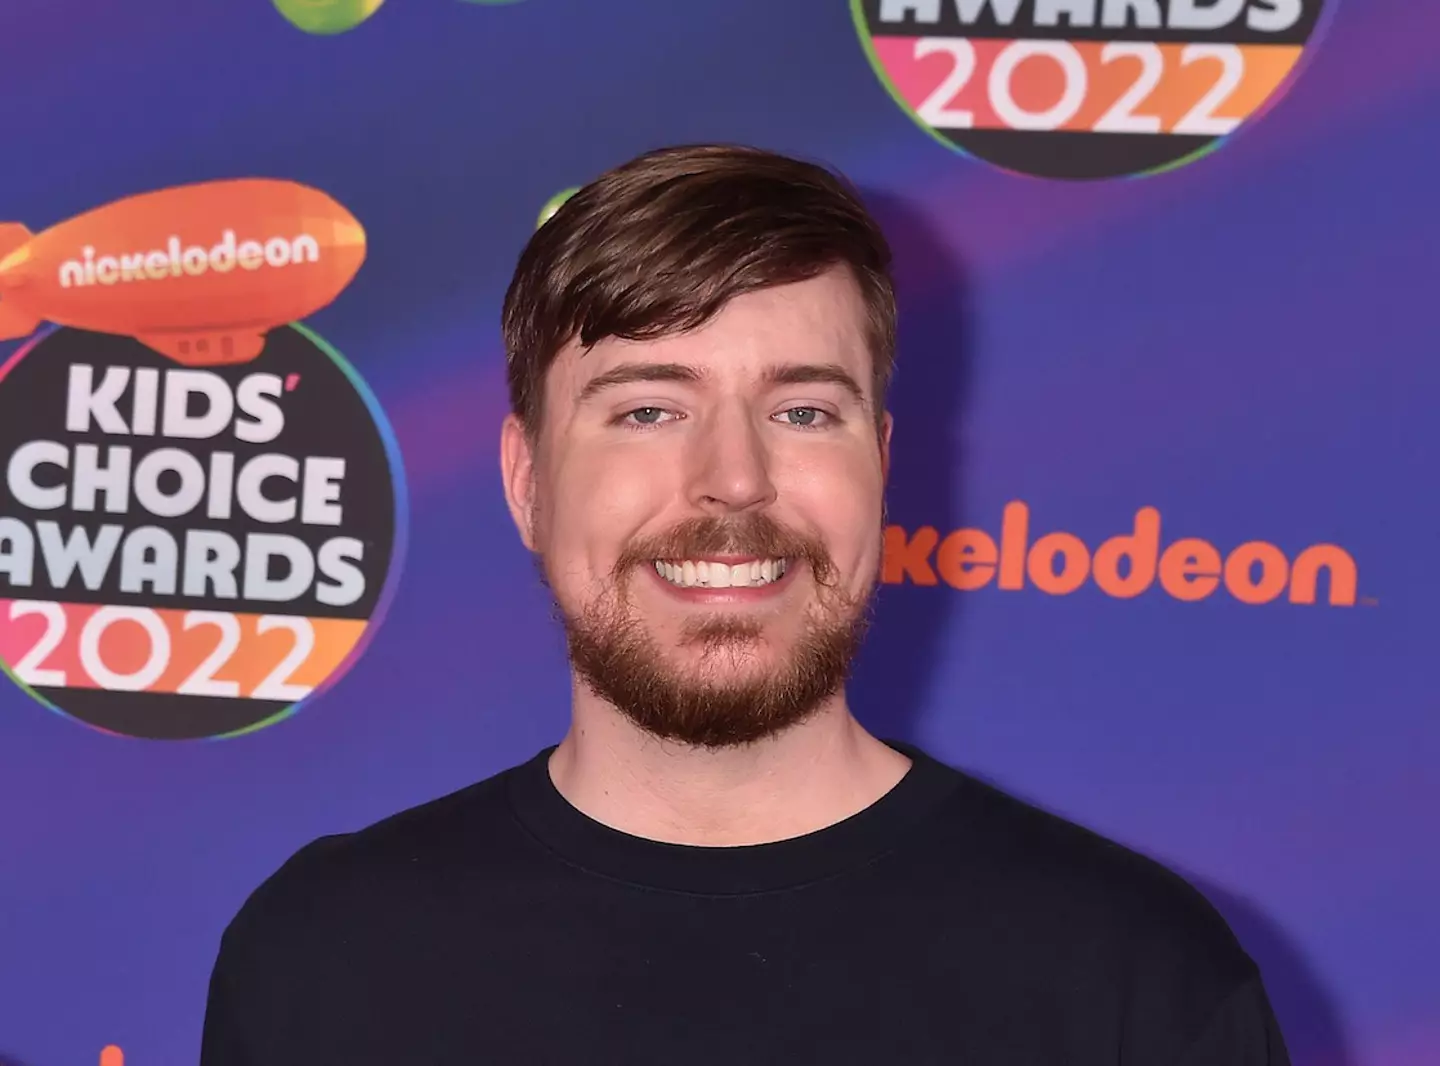 MrBeast (Jimmy Donaldson) has been named as Forbes' Top Creator of 2022.